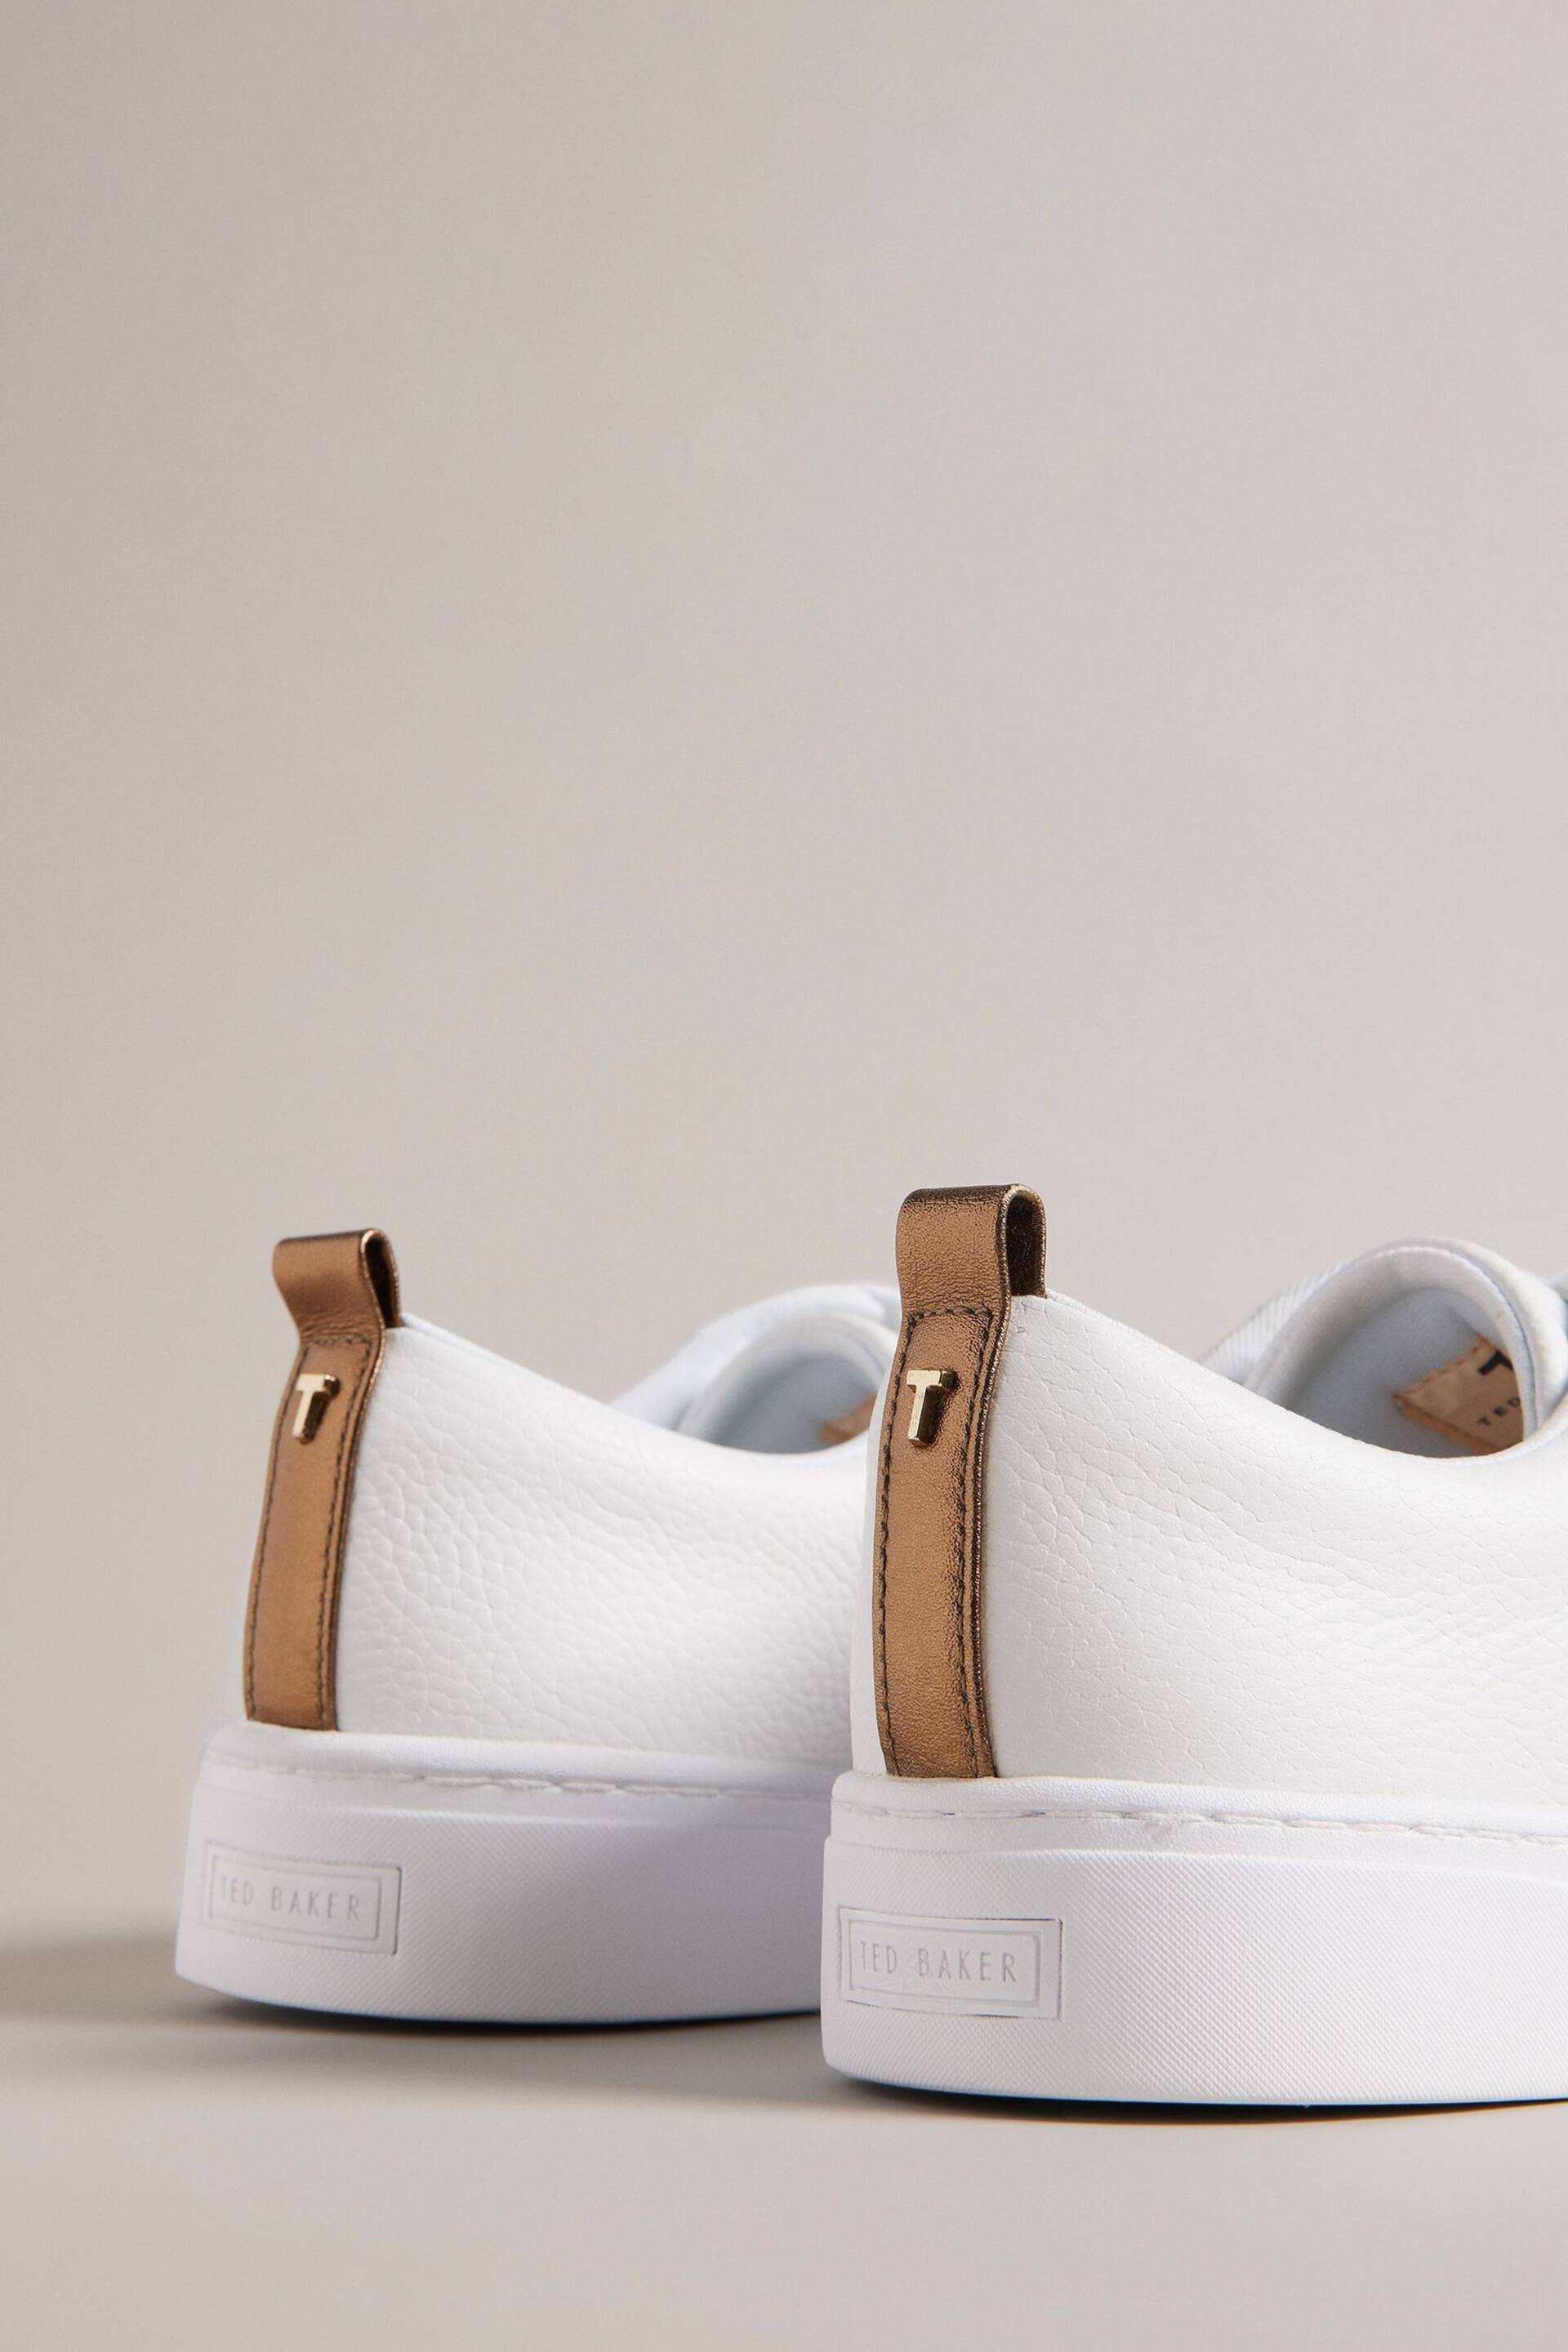 Ted Baker White/Gold Baily Webbing Cupsole Trainers - Image 4 of 4